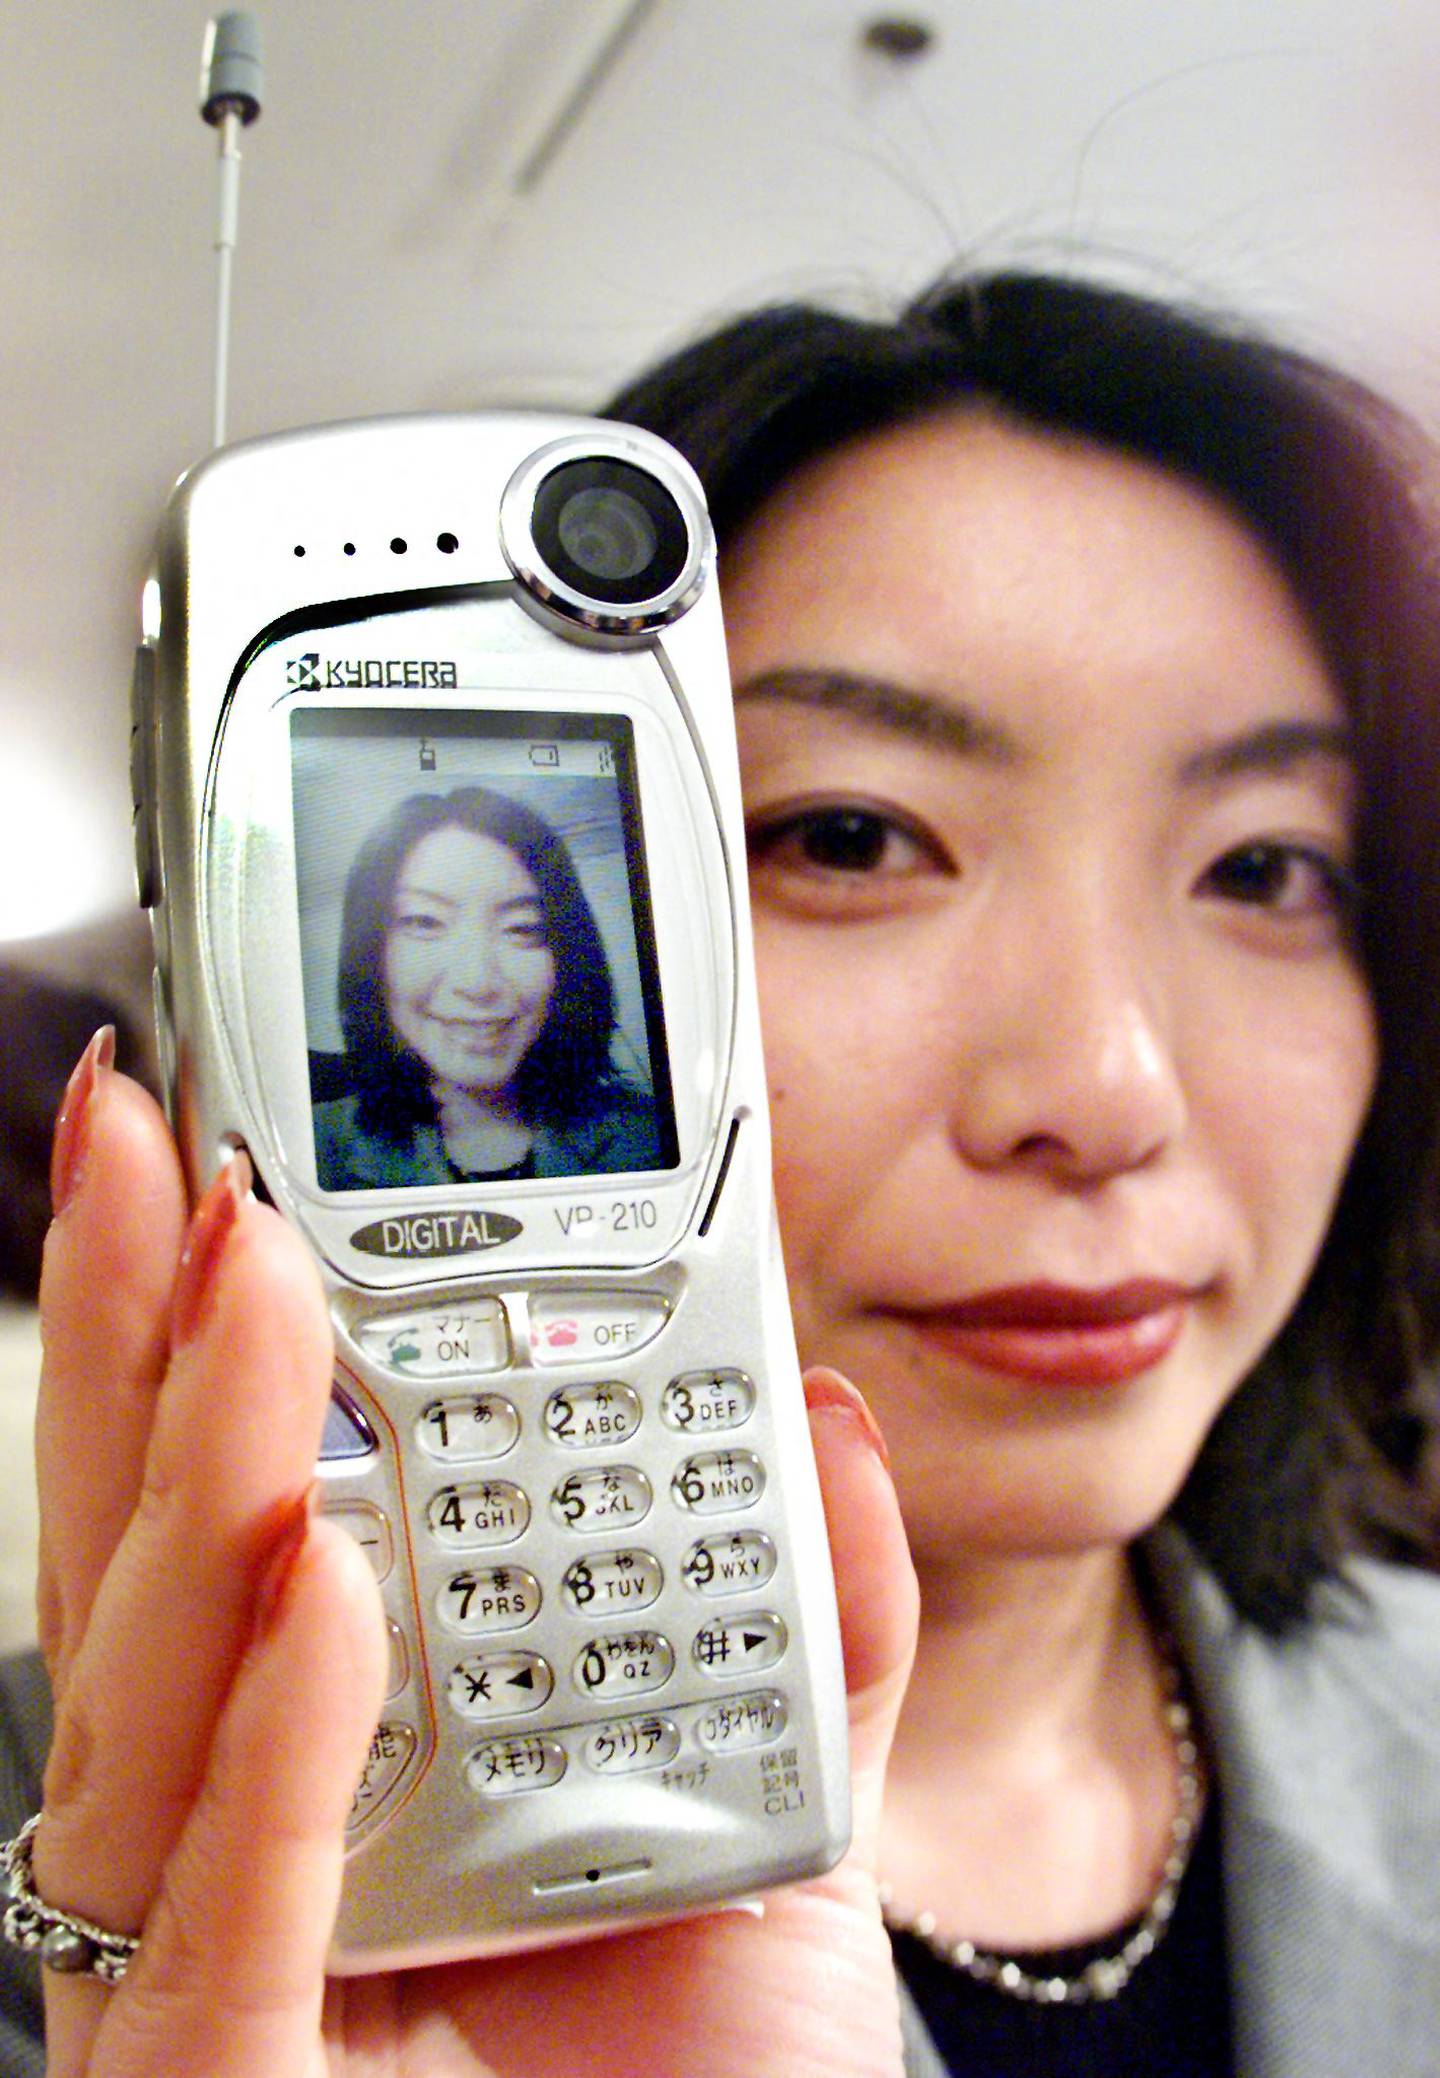 The Kyocera VP-210 had a front camera and can transmit two images per second through a mobile phone line. AFP